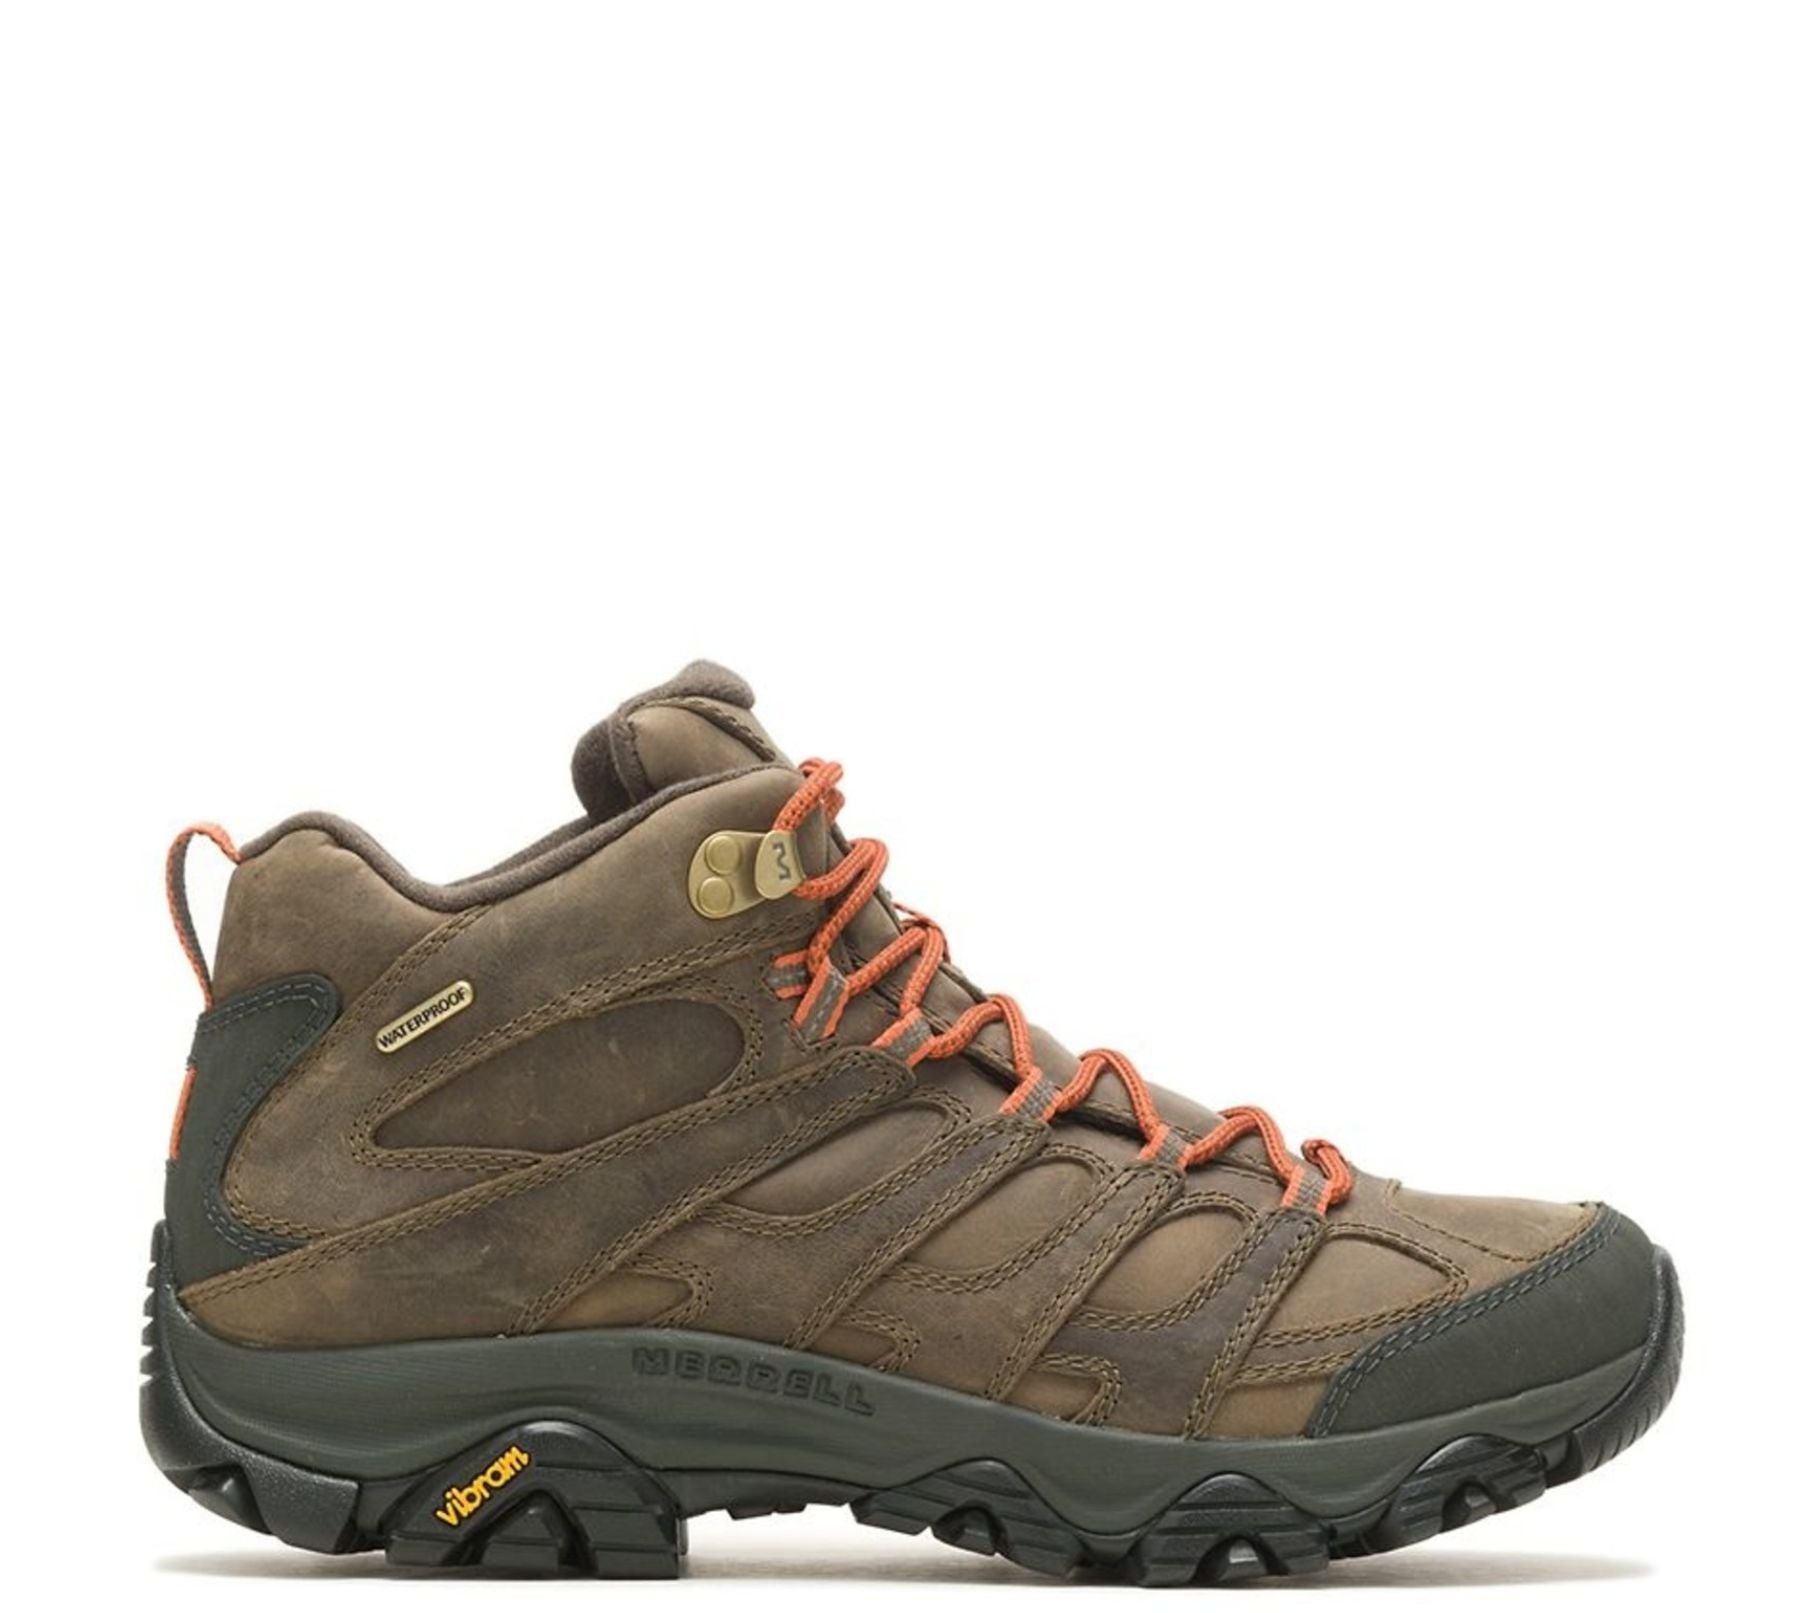 Merrell Men's Moab 3 Prime Waterproof Mid Boot - Work World - Workwear, Work Boots, Safety Gear